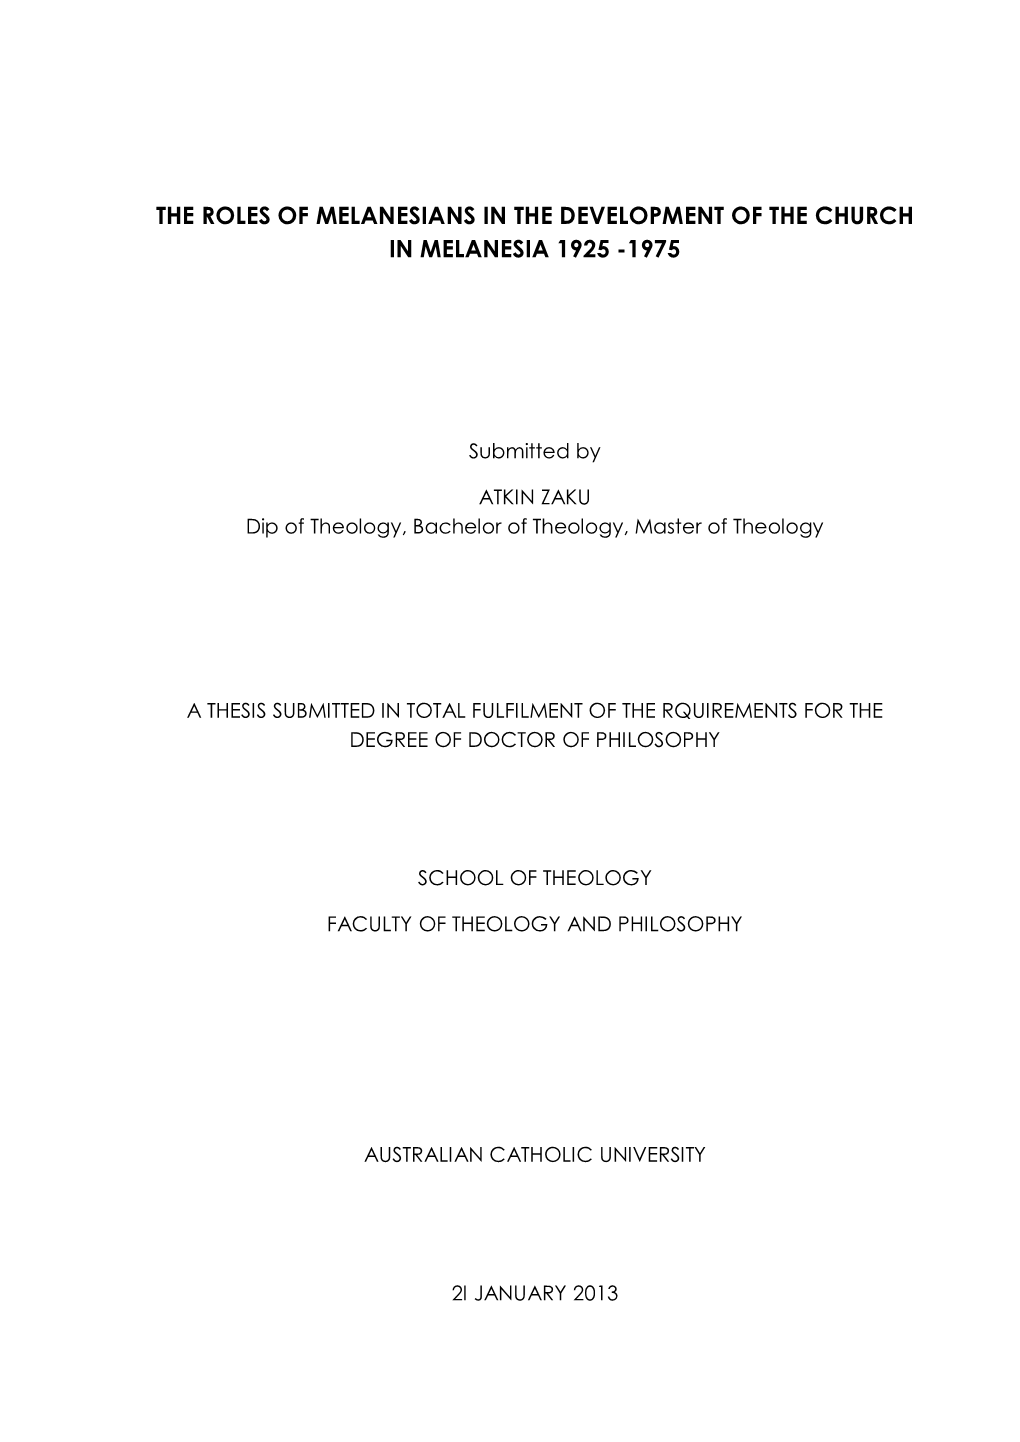 The Roles of Melanesians in the Development of the Church in Melanesia 1925 -1975